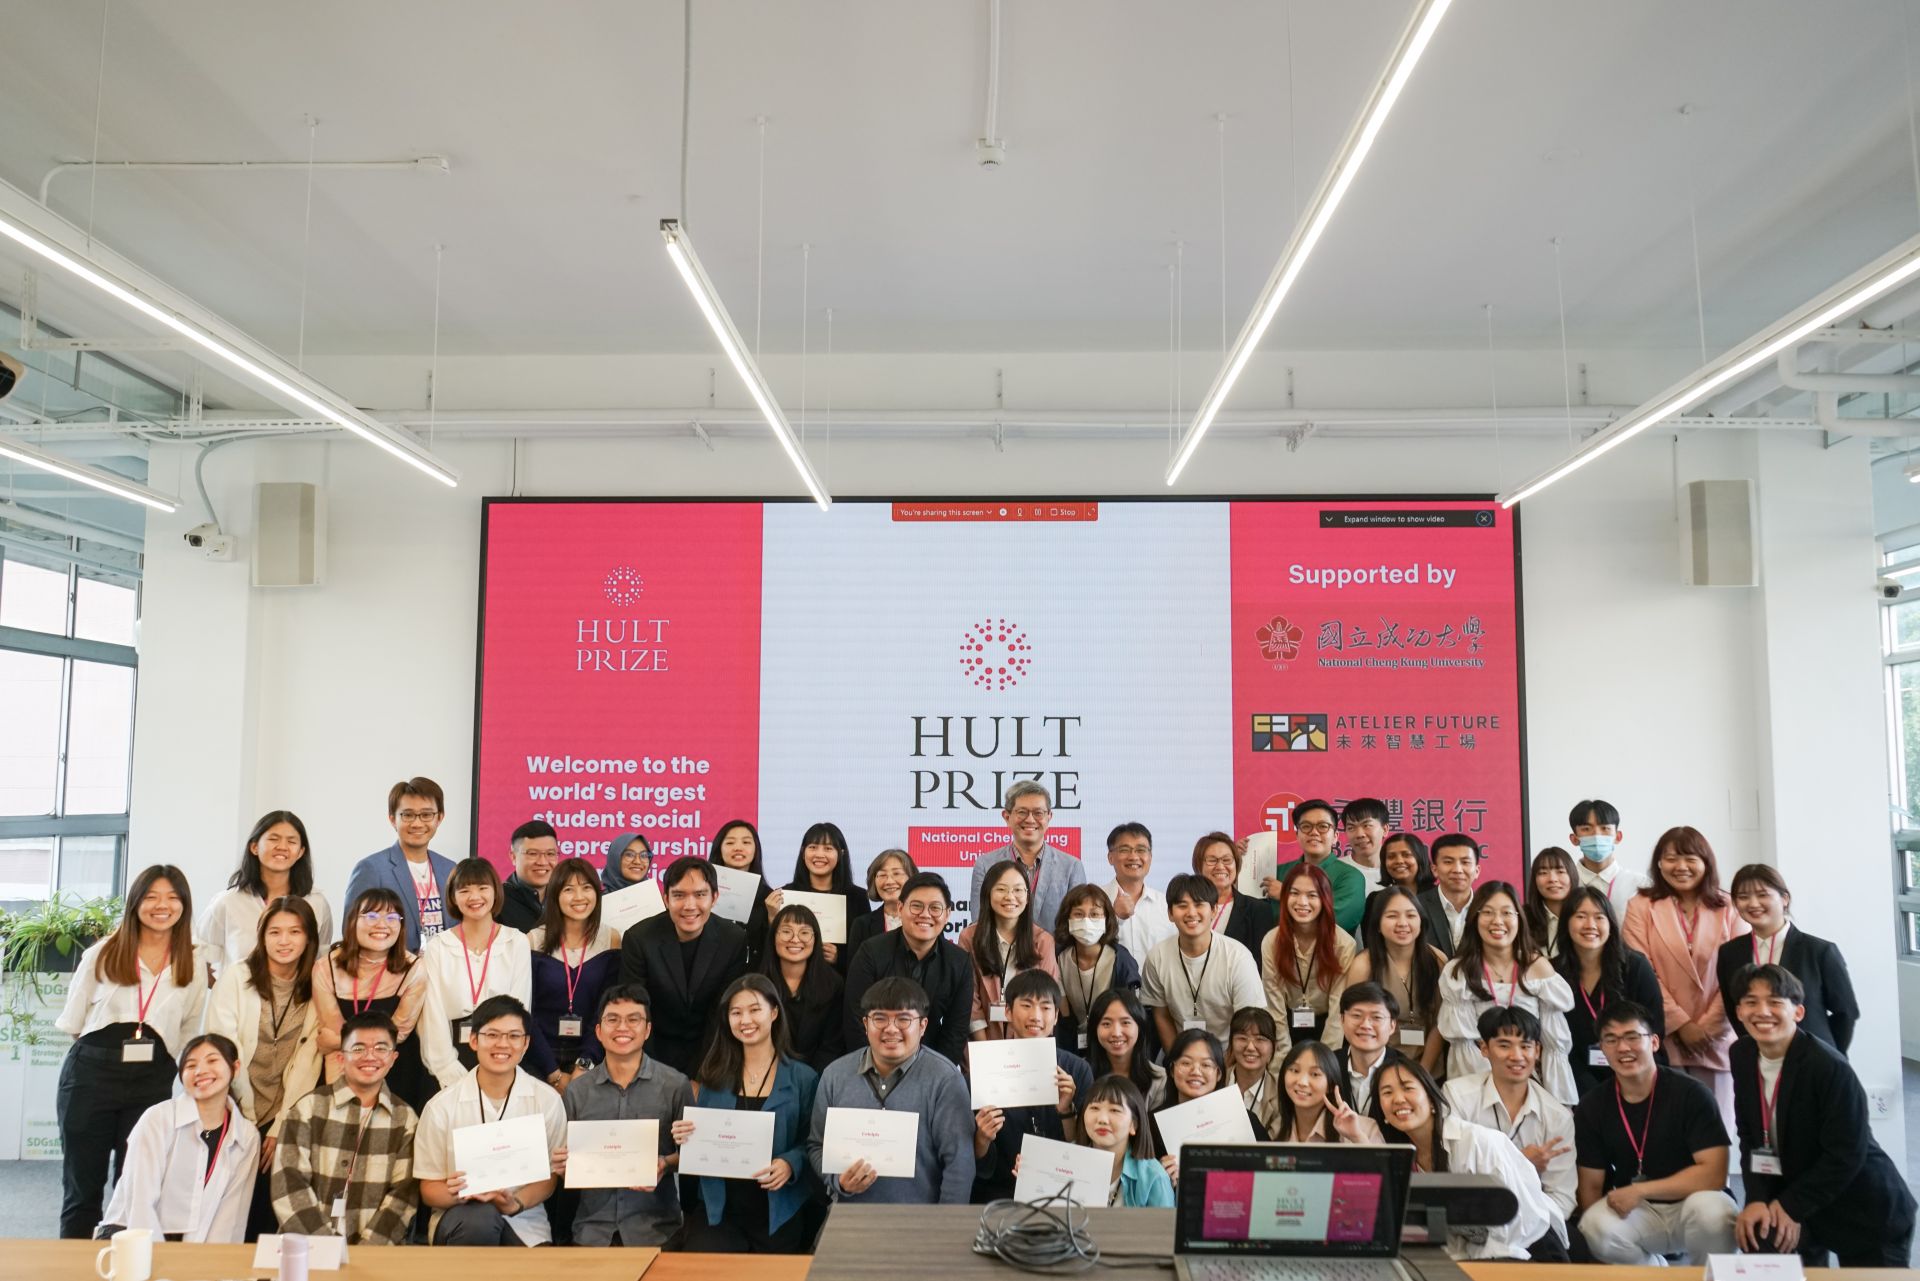 Focusing on Sustainable and Diverse Proposals, NCKU Holds Campus Finals for the Hult Prize.